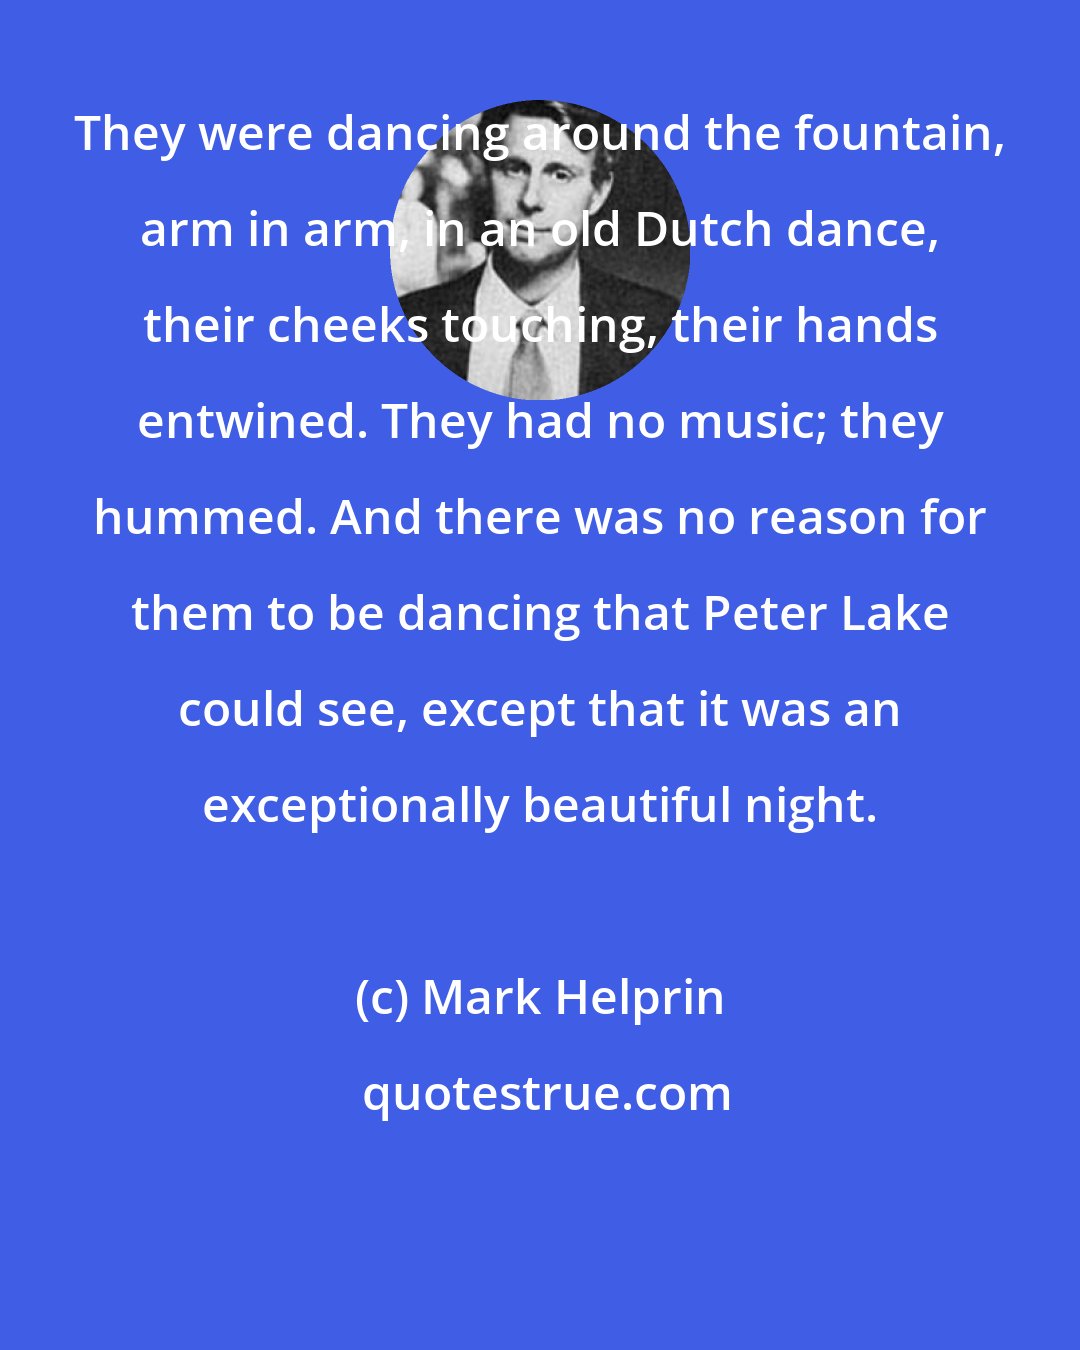 Mark Helprin: They were dancing around the fountain, arm in arm, in an old Dutch dance, their cheeks touching, their hands entwined. They had no music; they hummed. And there was no reason for them to be dancing that Peter Lake could see, except that it was an exceptionally beautiful night.